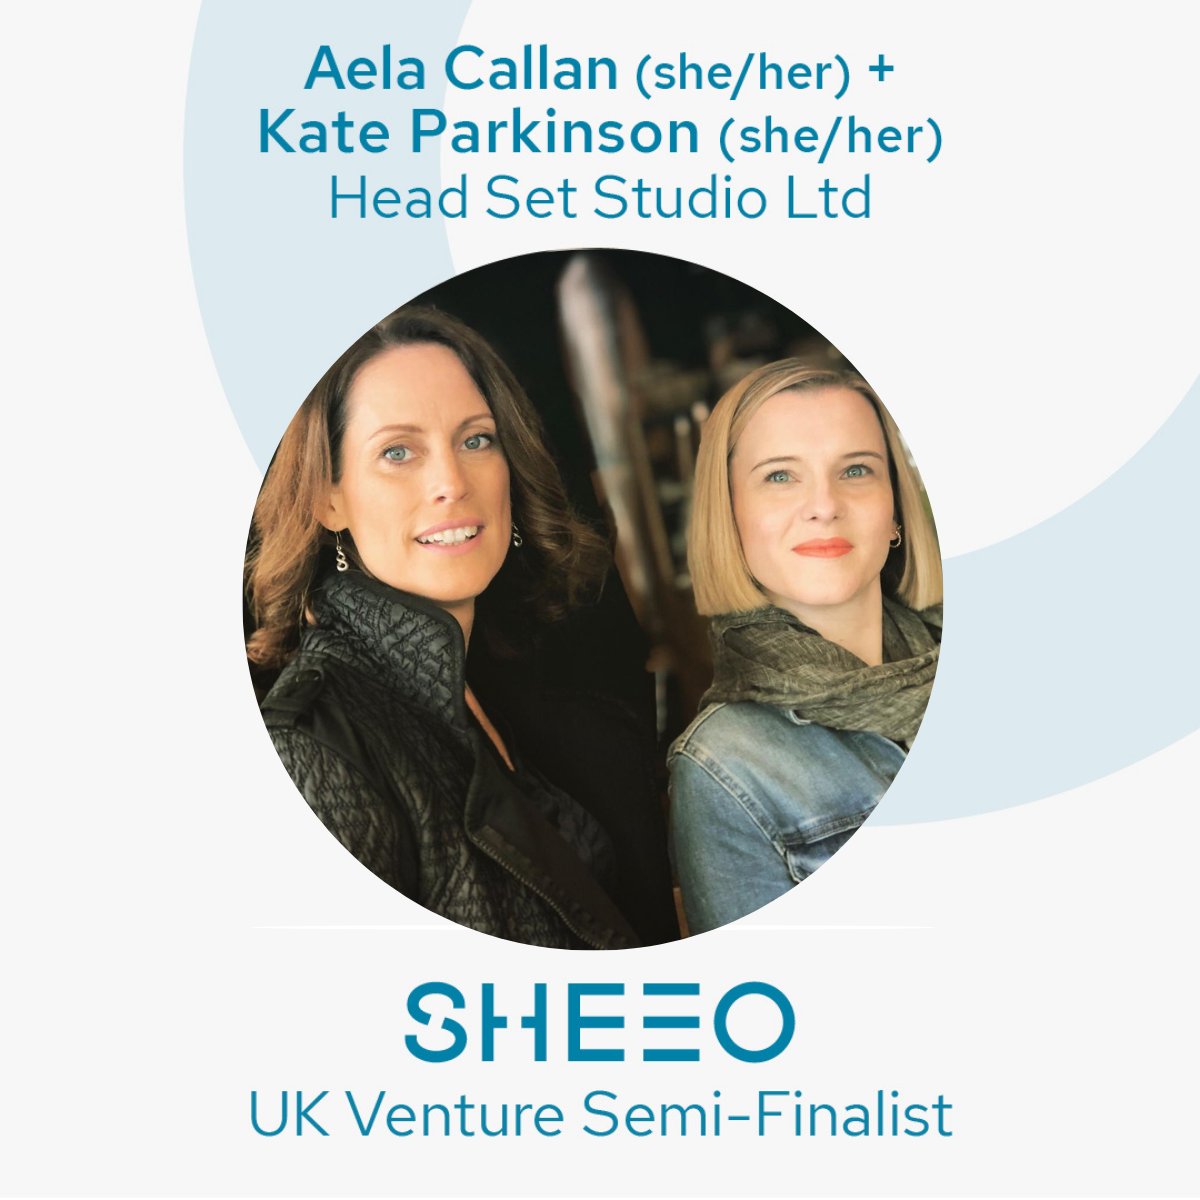 We are IN! Beyond excited that Head Set has been selected as a @SheEO_World Venture semi-finalist getting the world's 'to-do' list done. #VRforGood #FemaleFounders